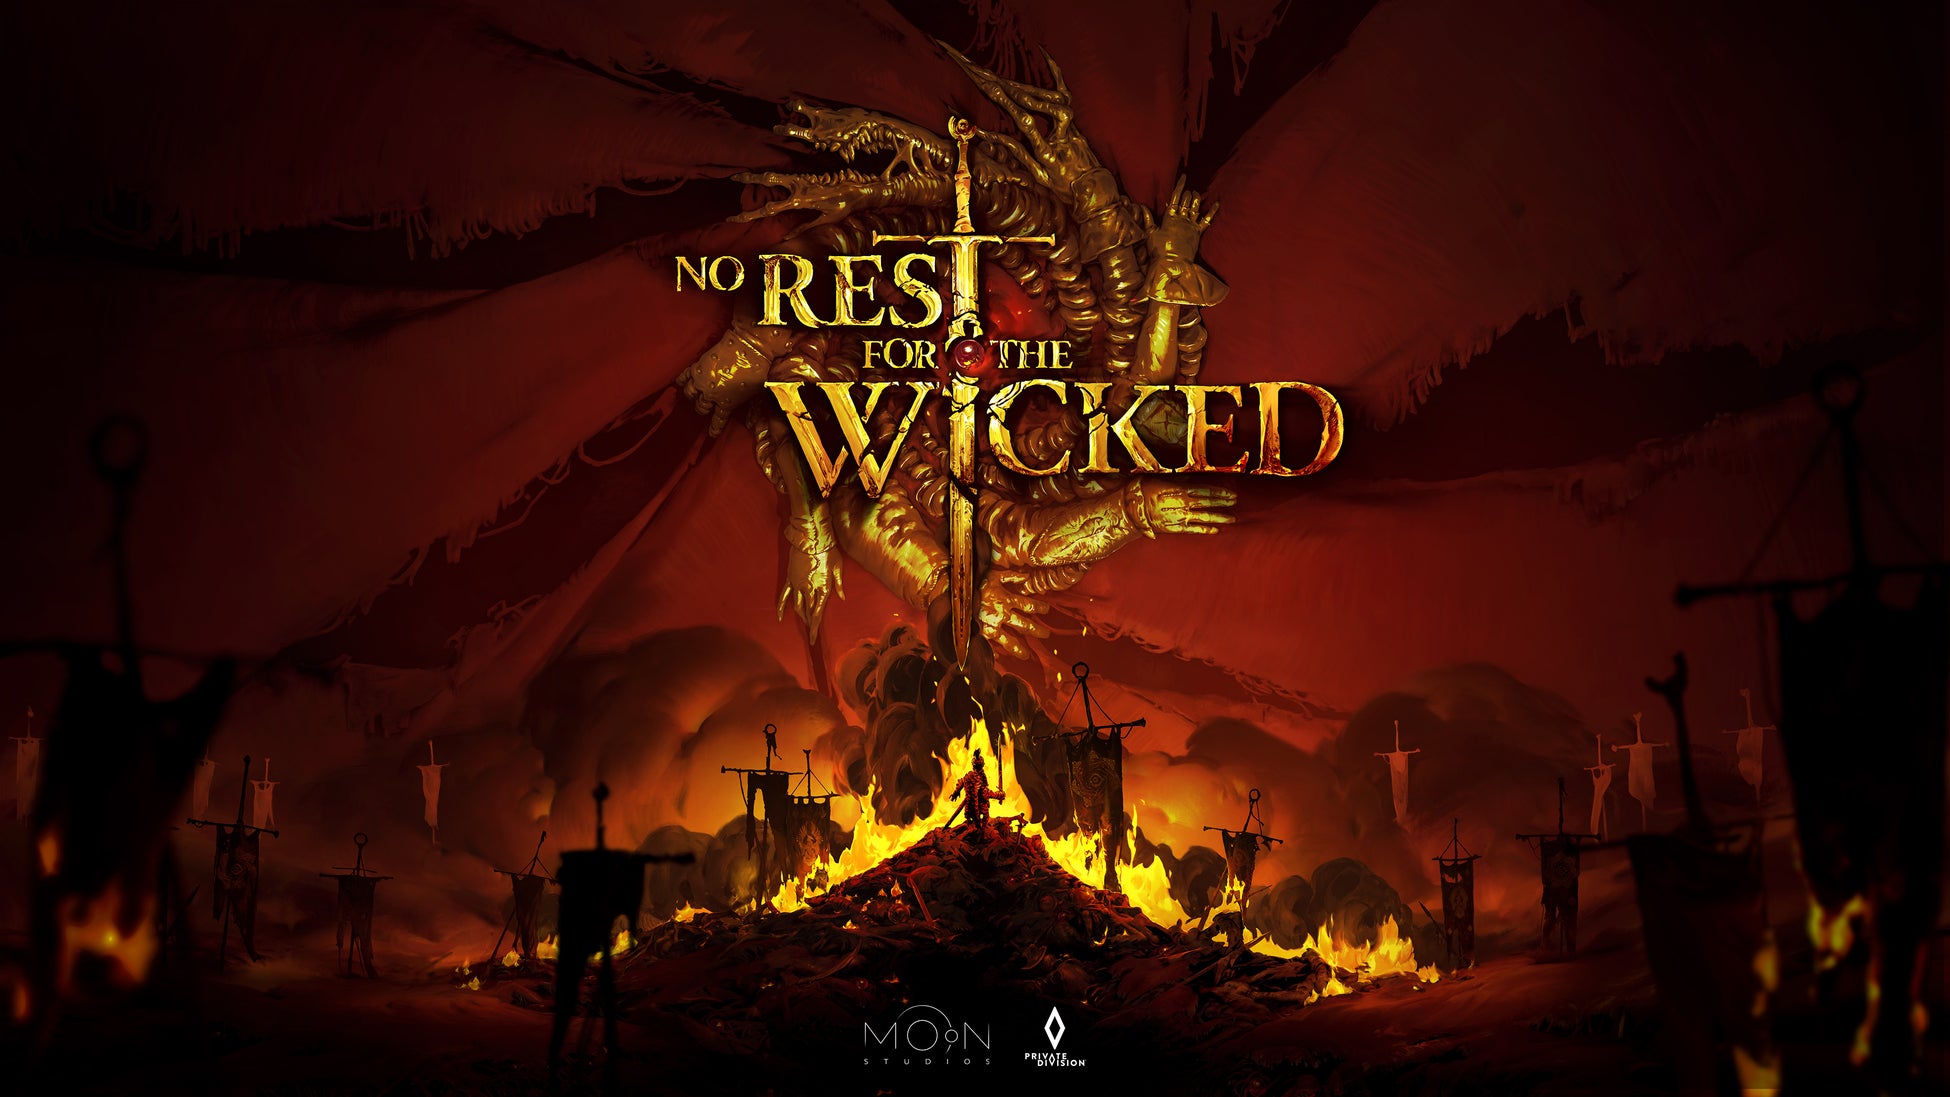 Private DivisionとMoon Studios『No Rest for the Wicked』を発表